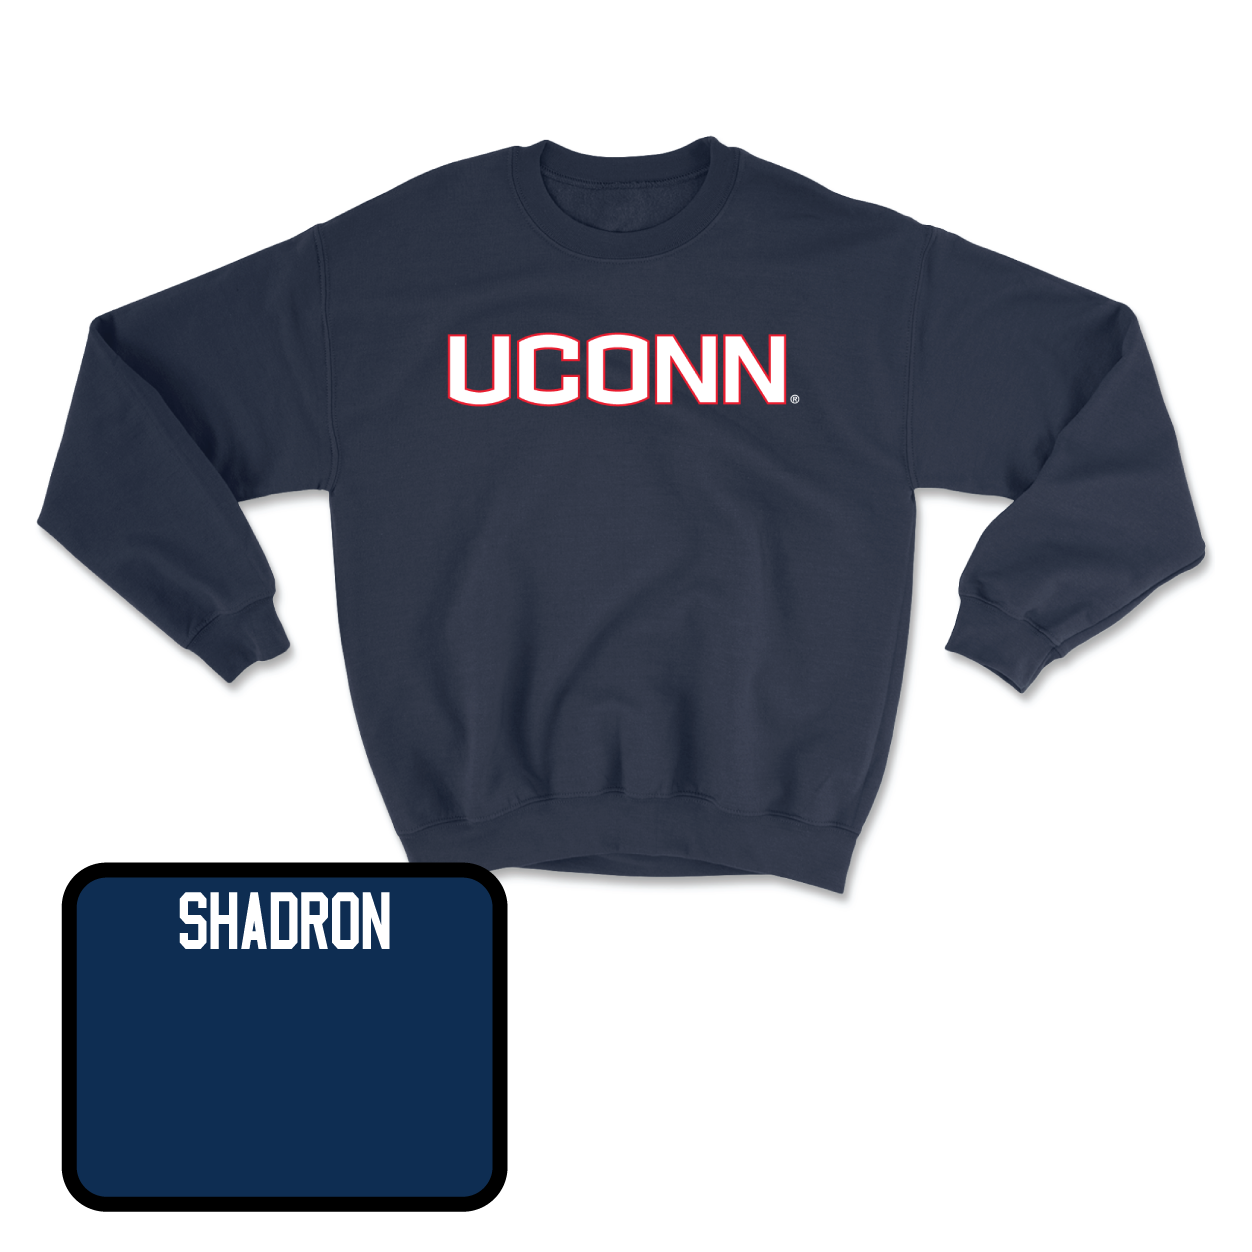 Navy Women's Rowing UConn Crewneck Youth Small / Genevieve Shadron